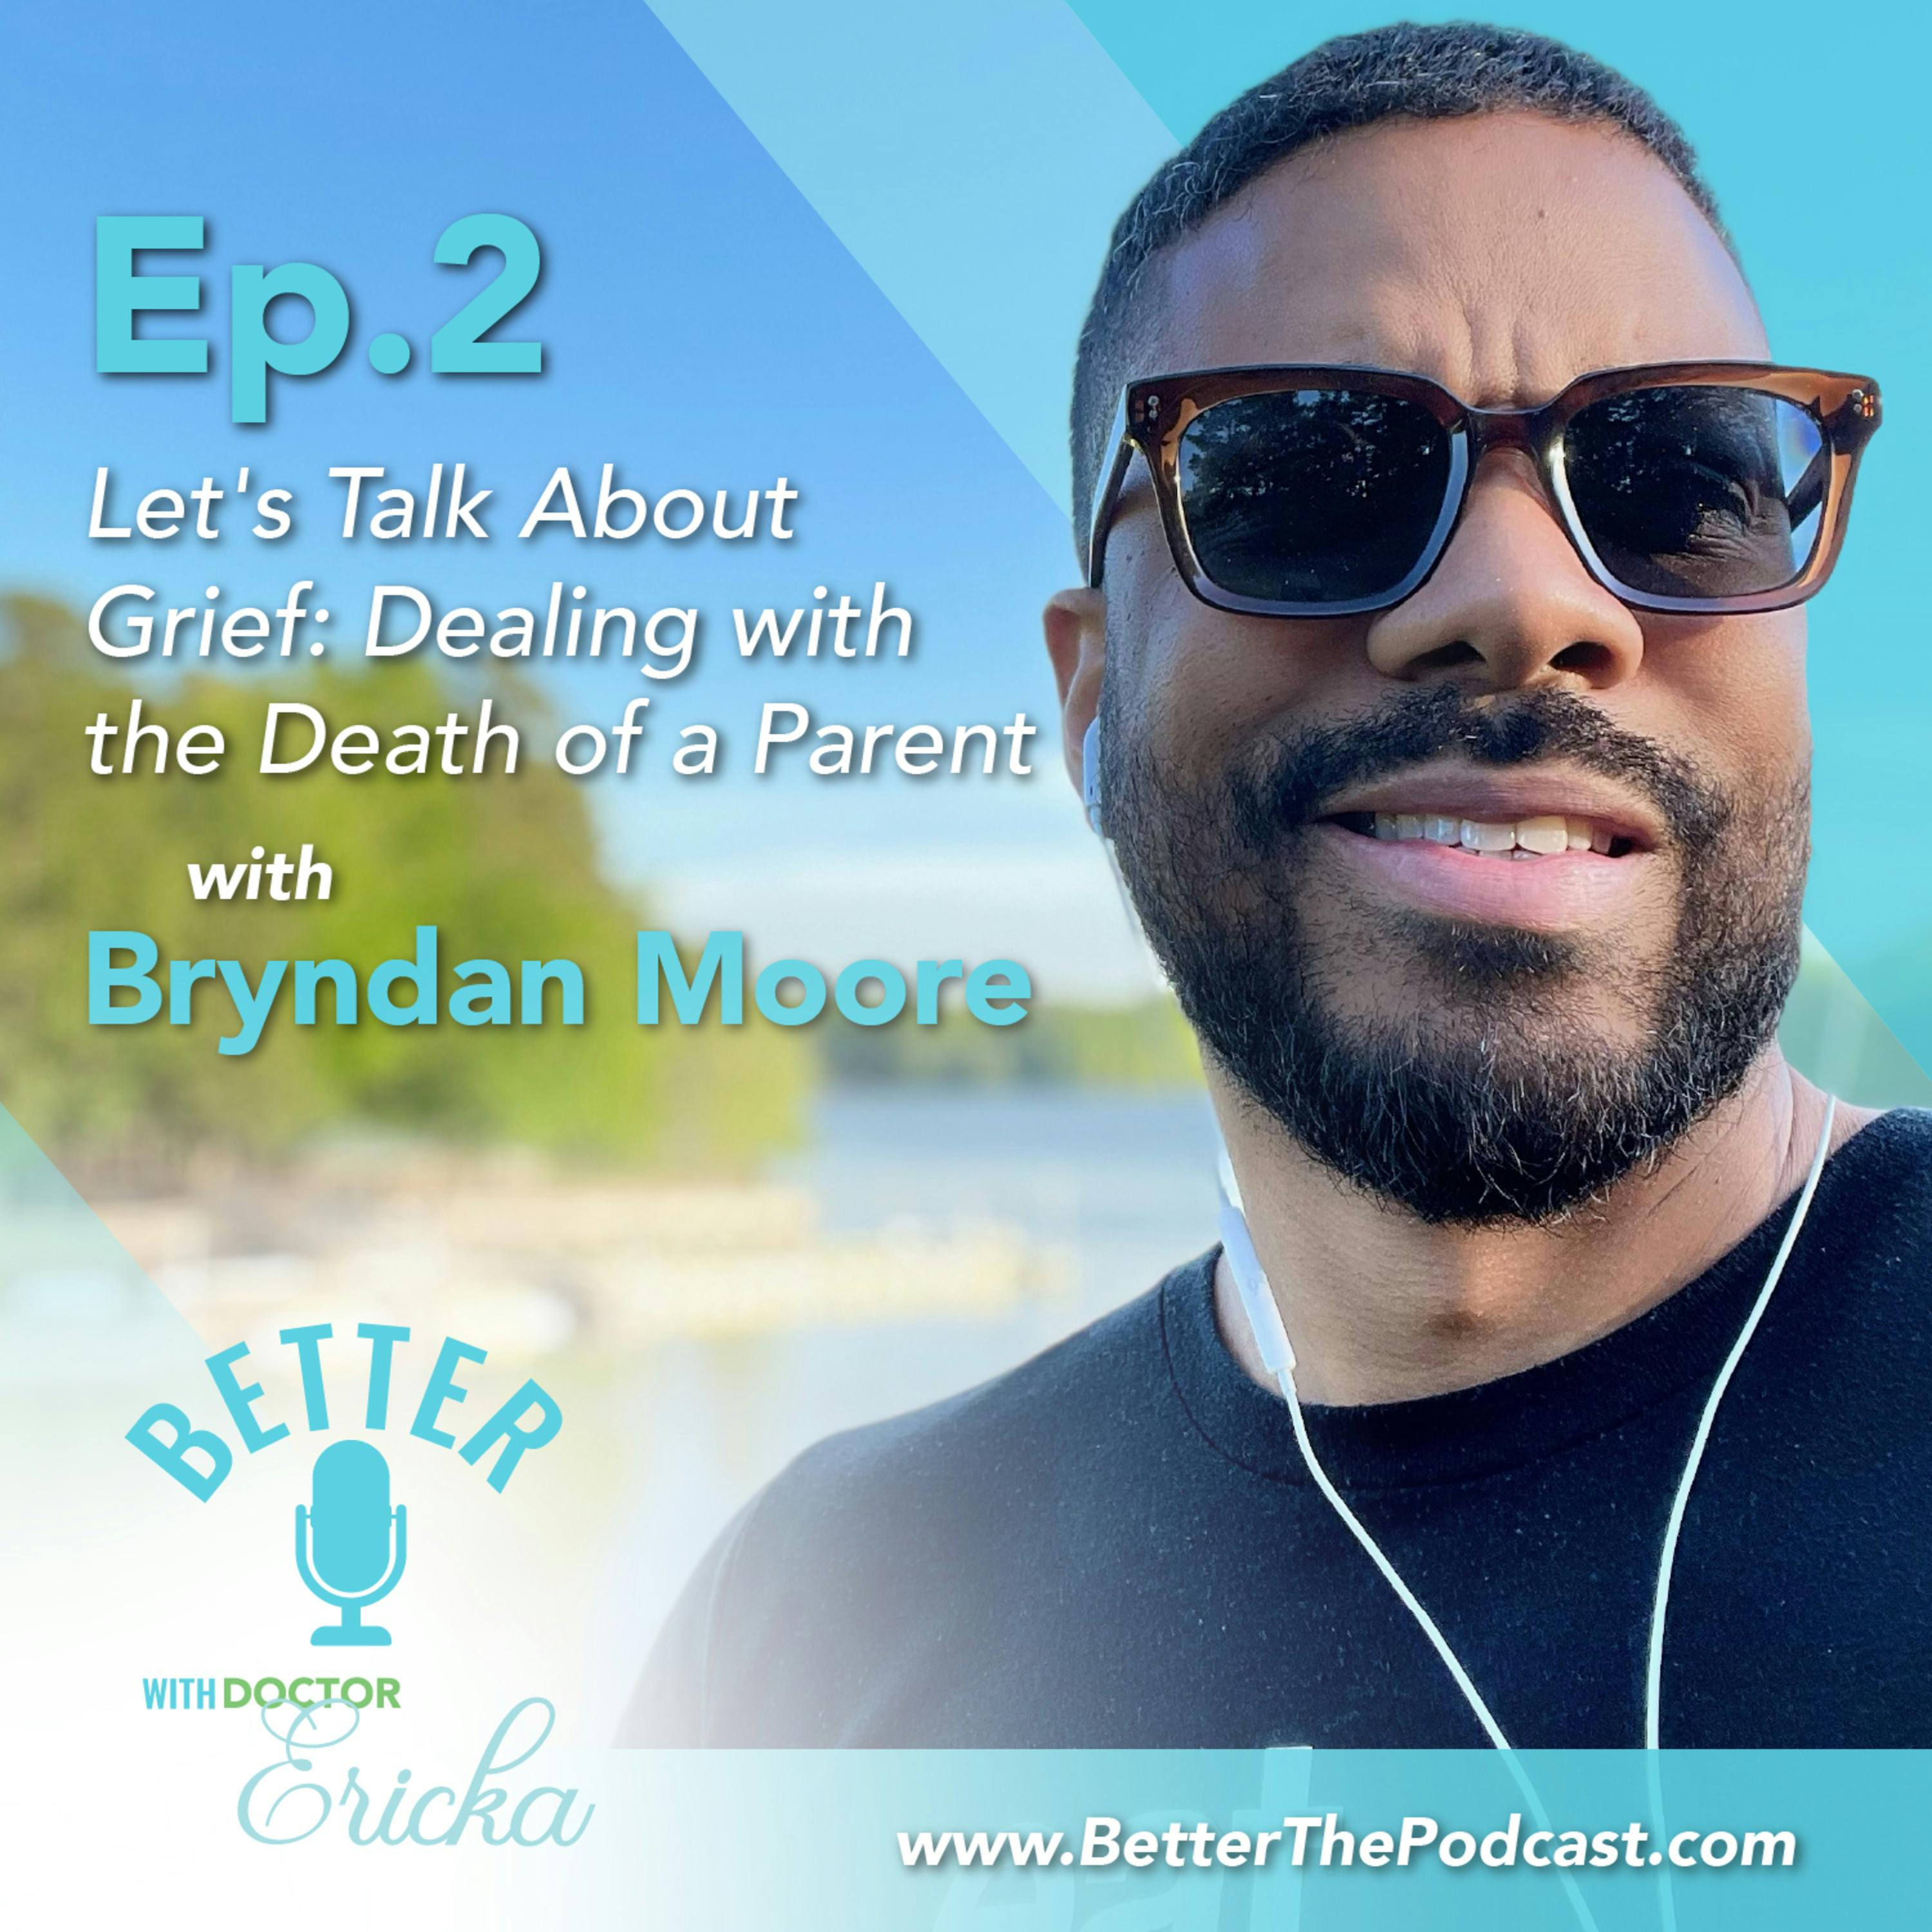 Let’s Talk About Grief: Dealing with the death of a parent with Bryndan Moore